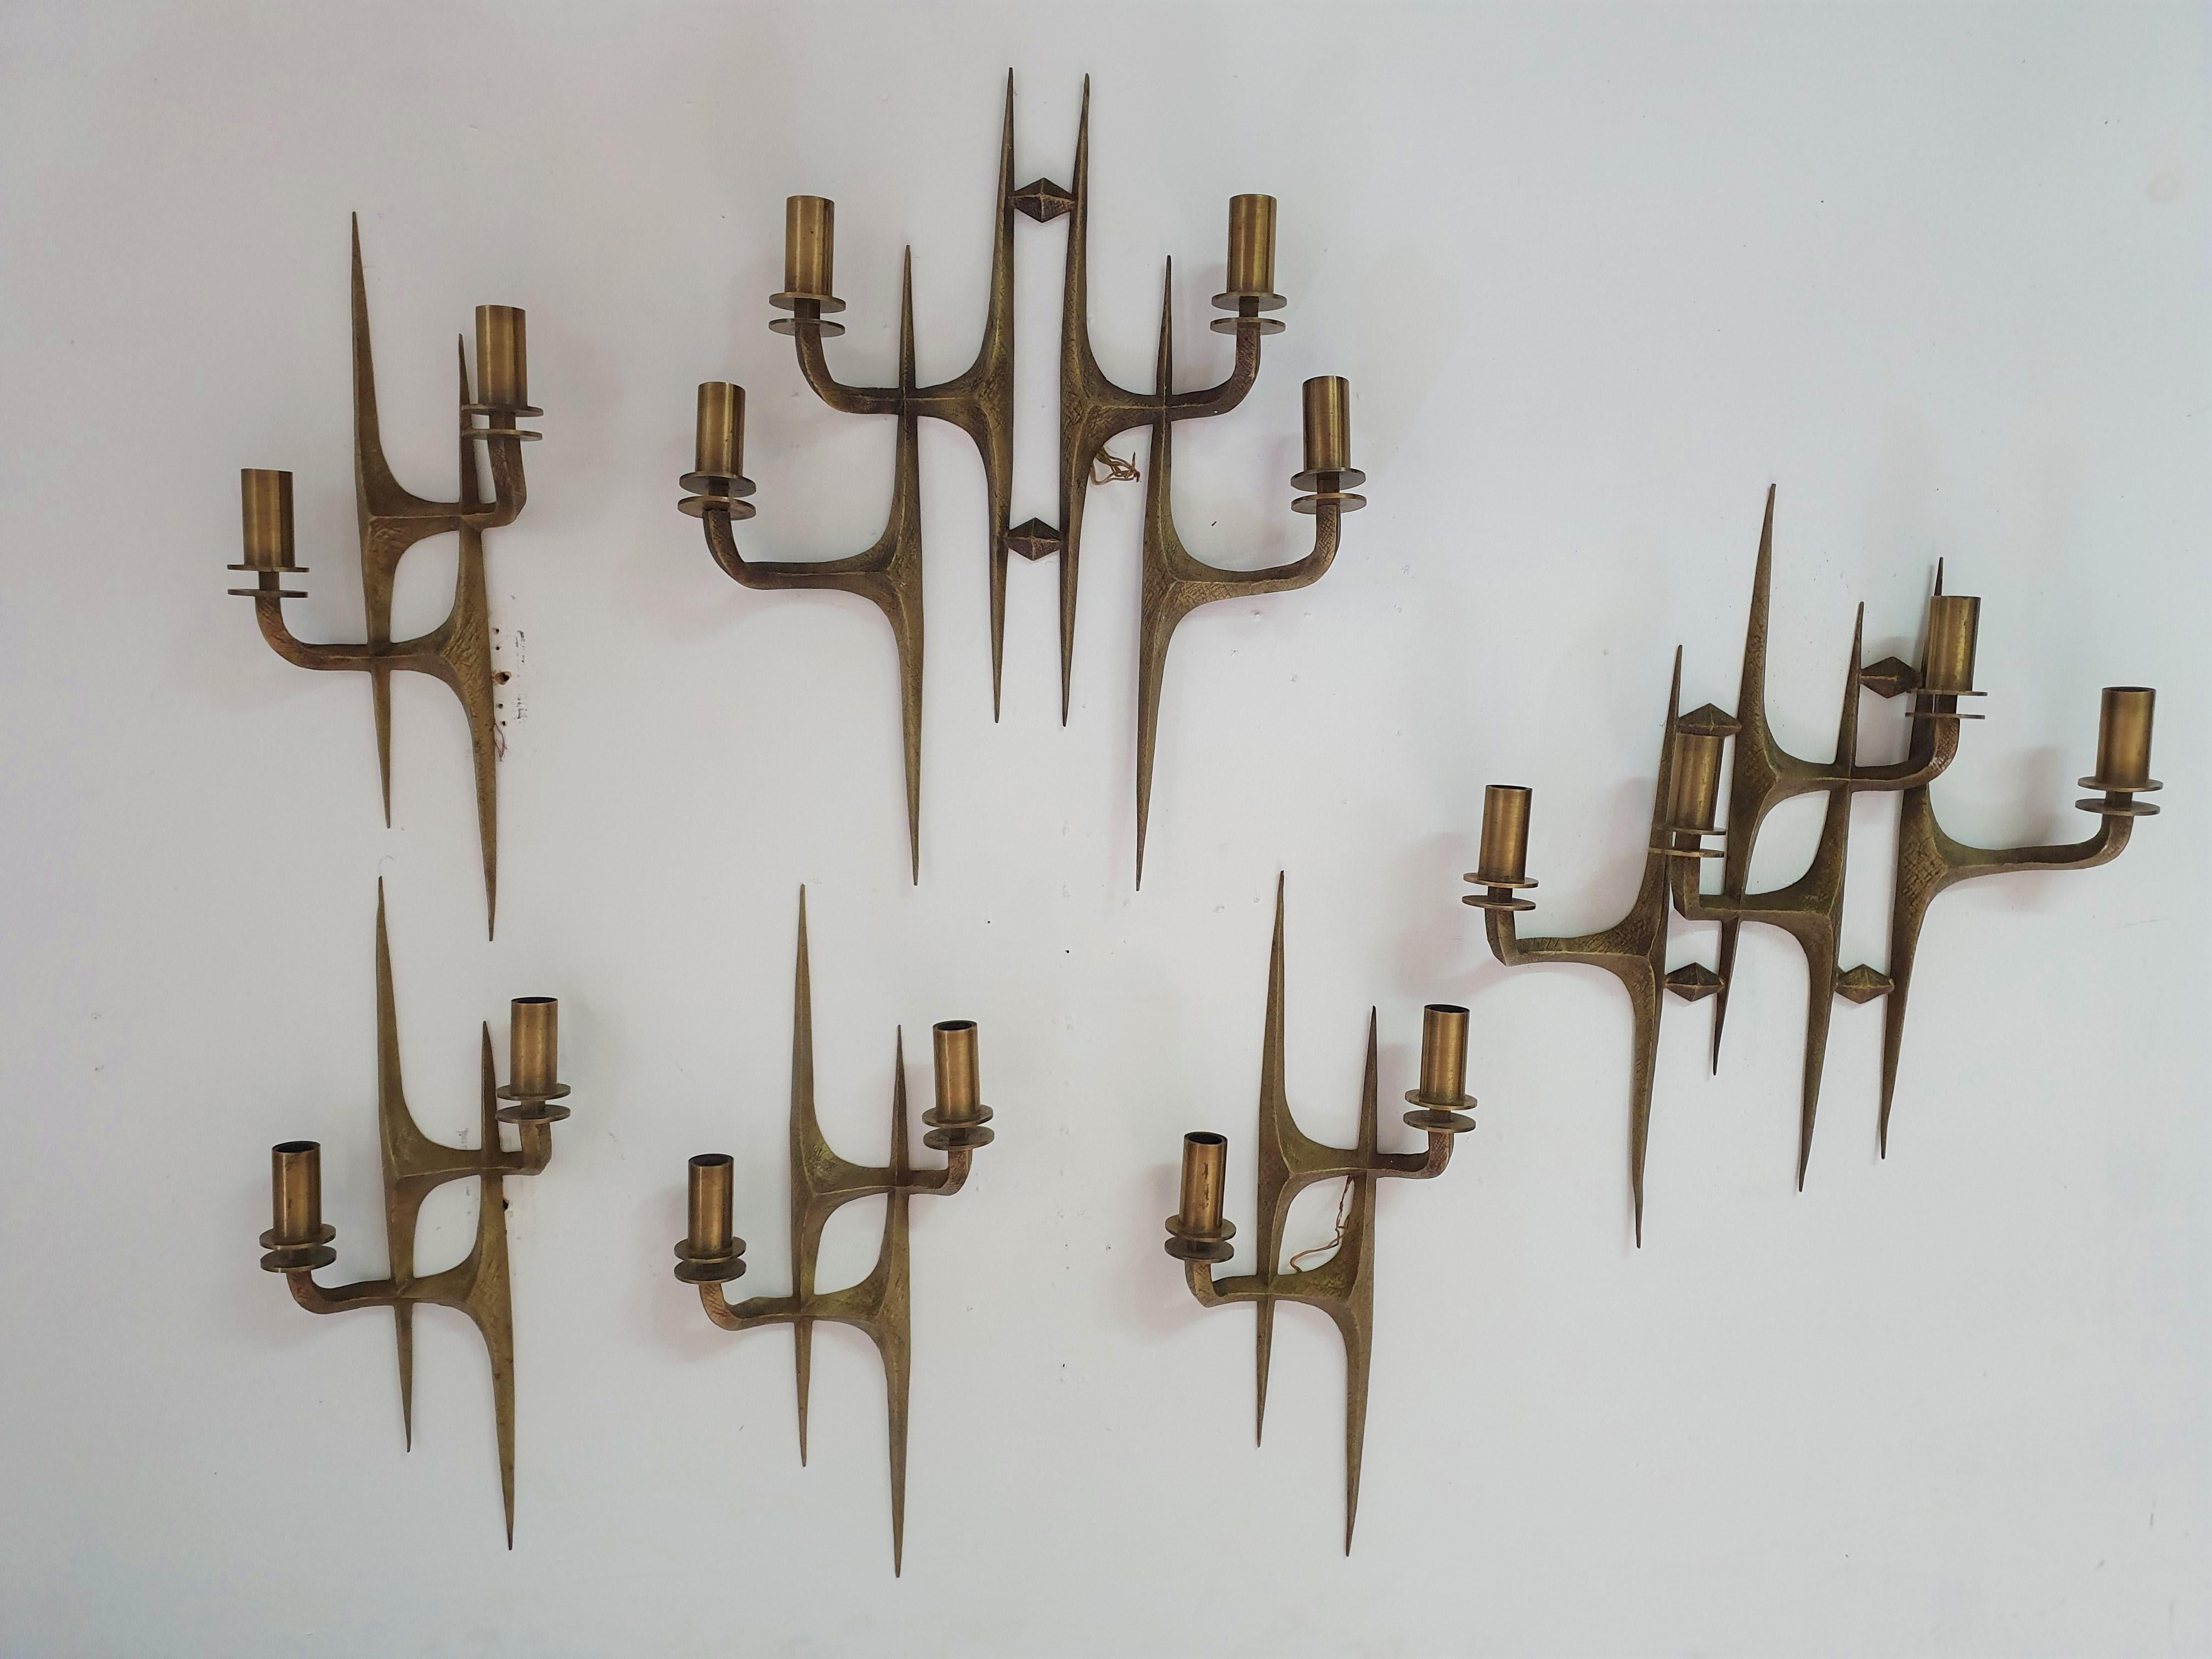 Brass Pair of Four Light Mid-Century Modern Brutalist Sconces, Italy, circa 1960s For Sale